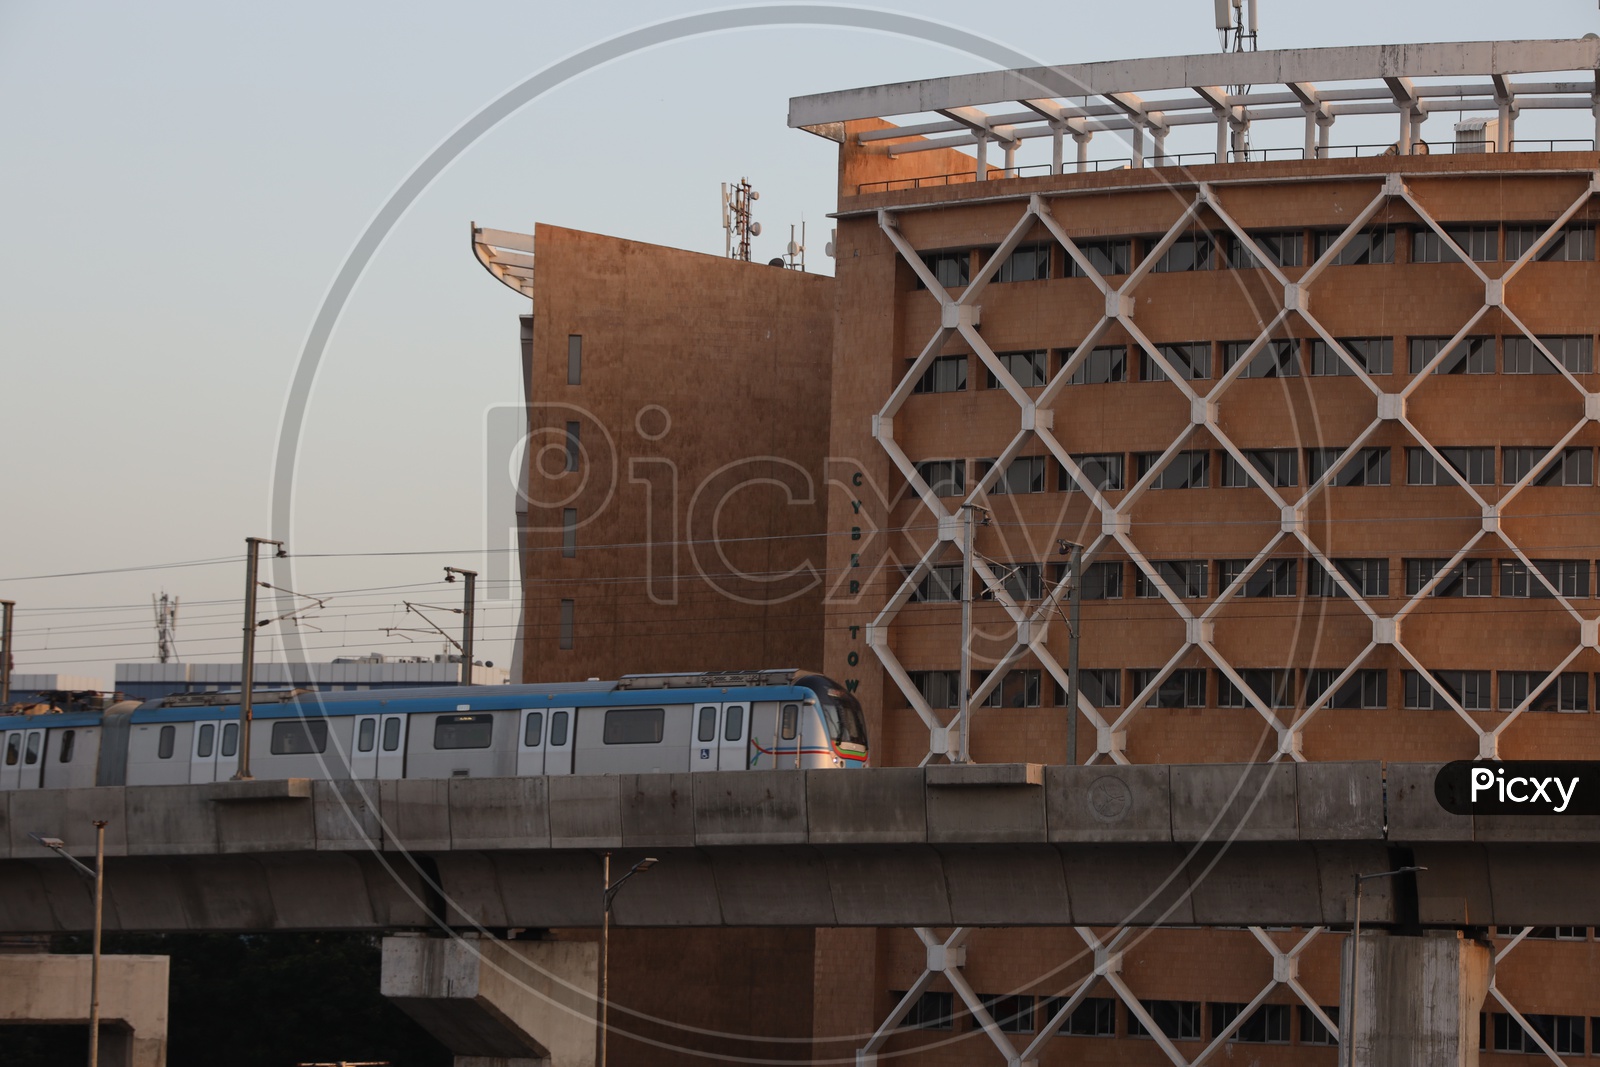 Hyderabad Metro Train  Running on track Composition With Cyber Towers In Background